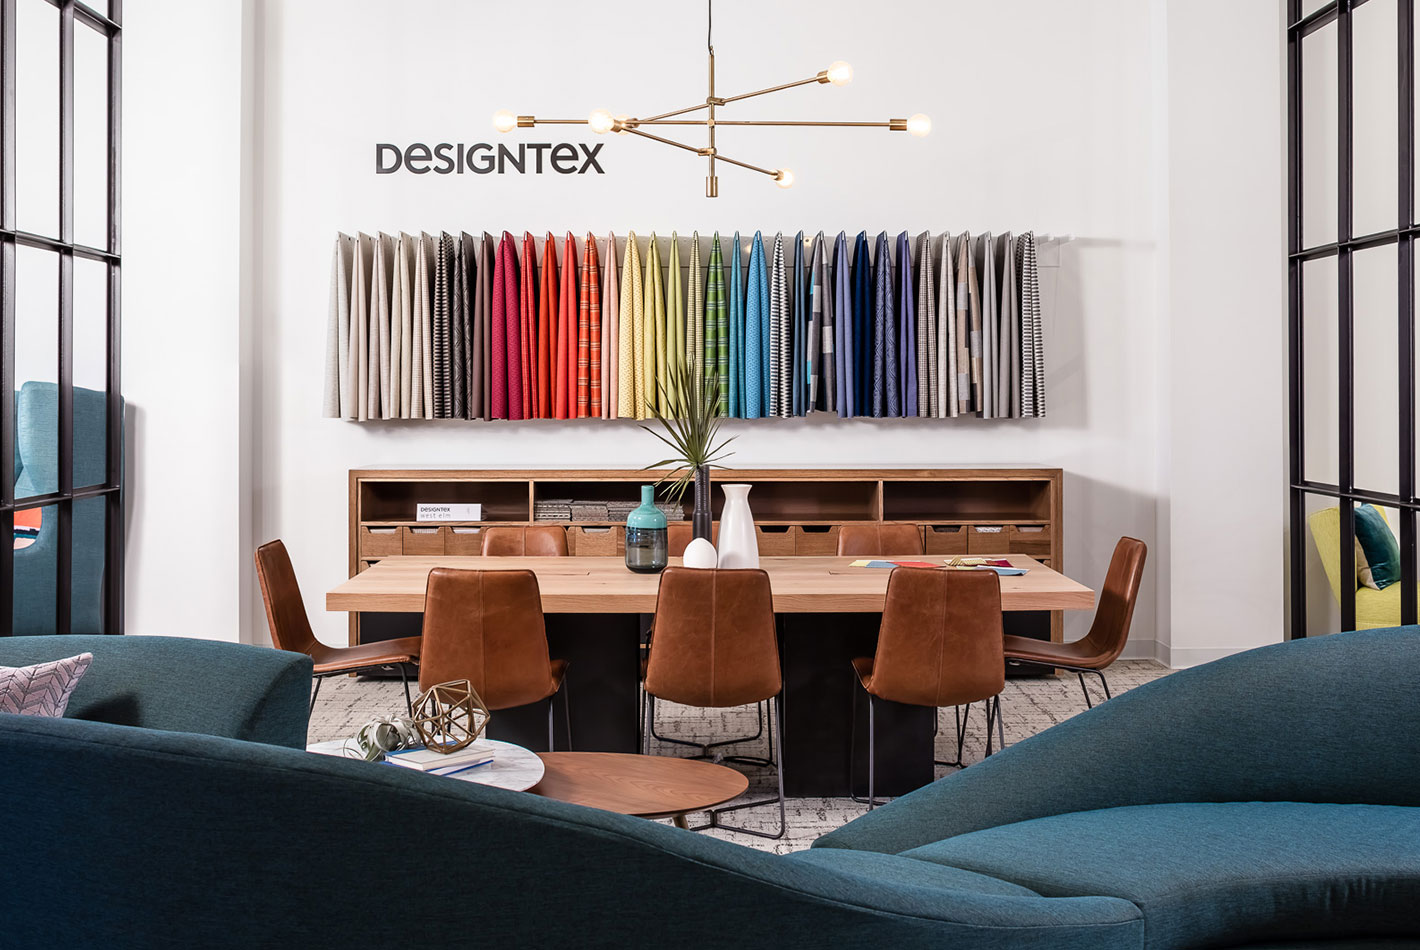 A collection of DesignTex fabrics hangs on a wall above a conference room table in West Elm's Workspace showroom in Minneapolis.